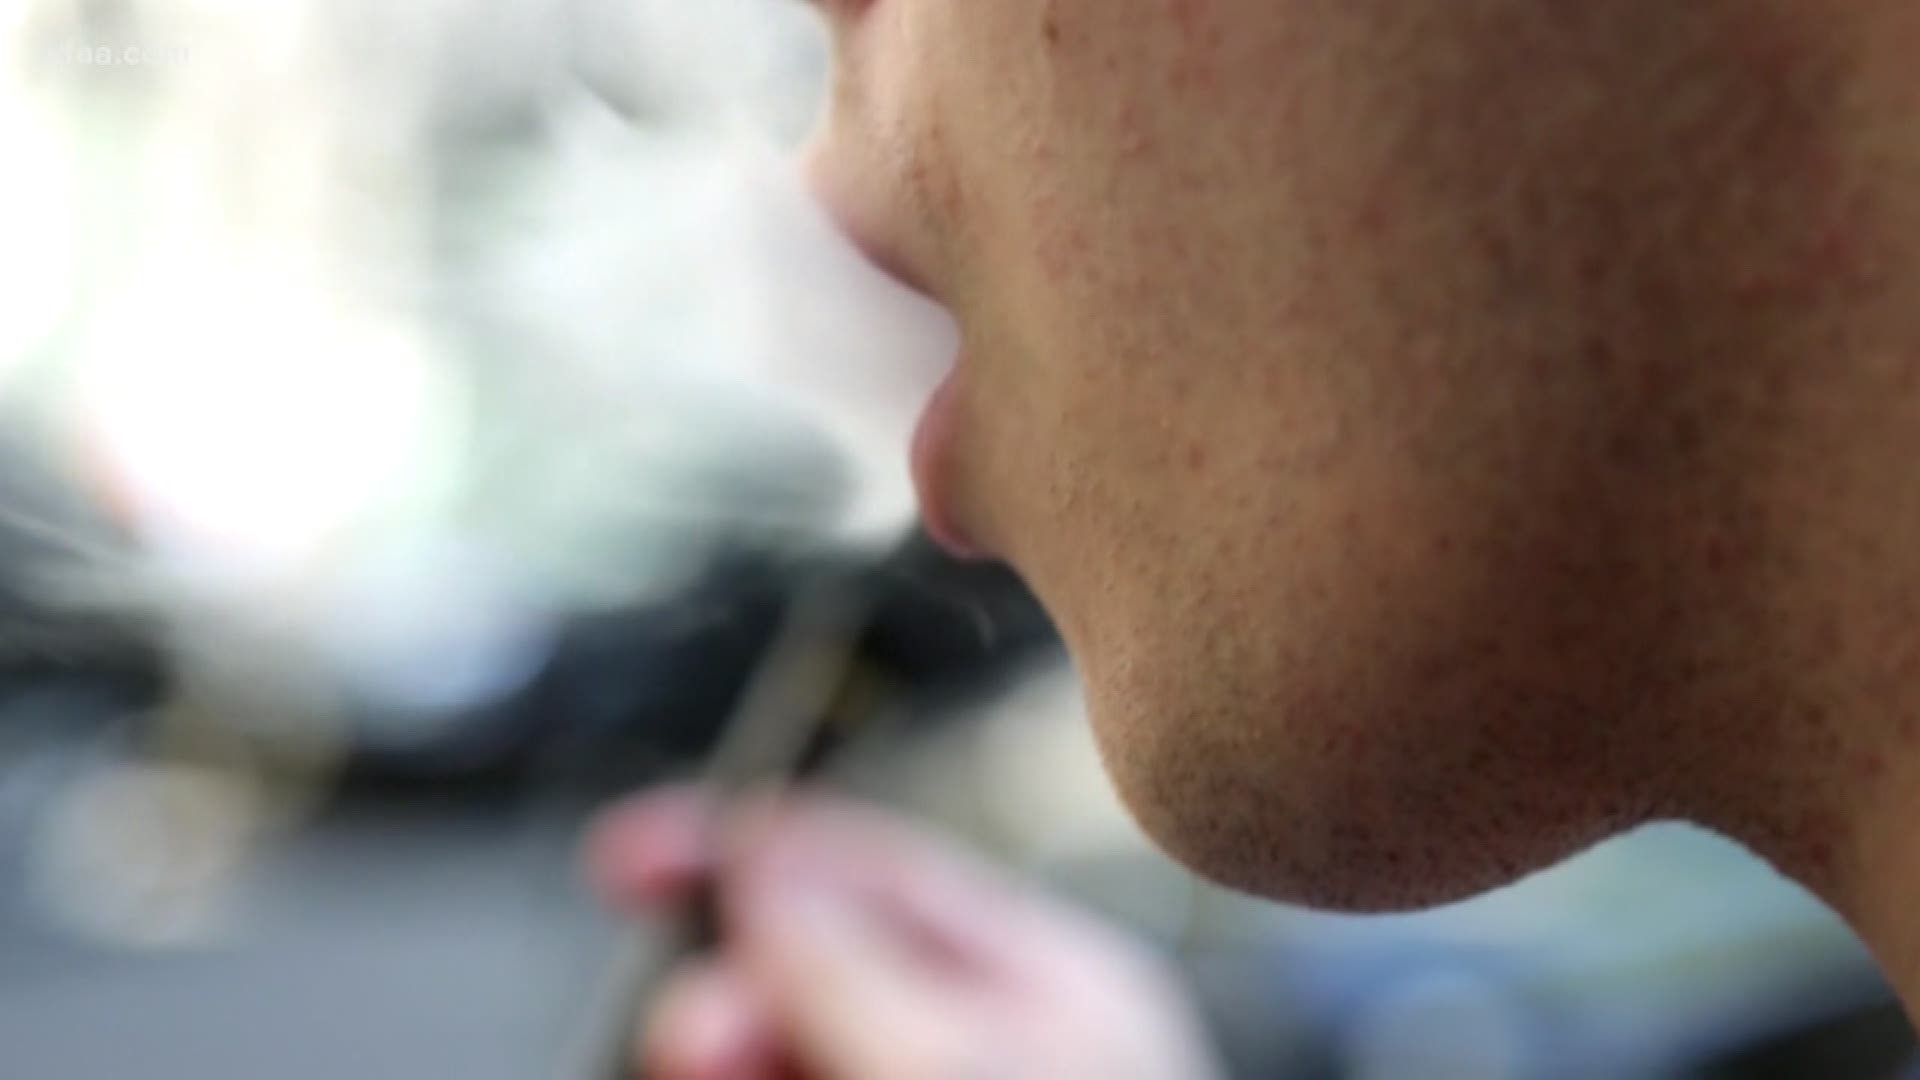 'Catch My Breath' is a national program that aims at preventing e-cigarette and vaping use in students ranging from fifth grade through senior year of high school.